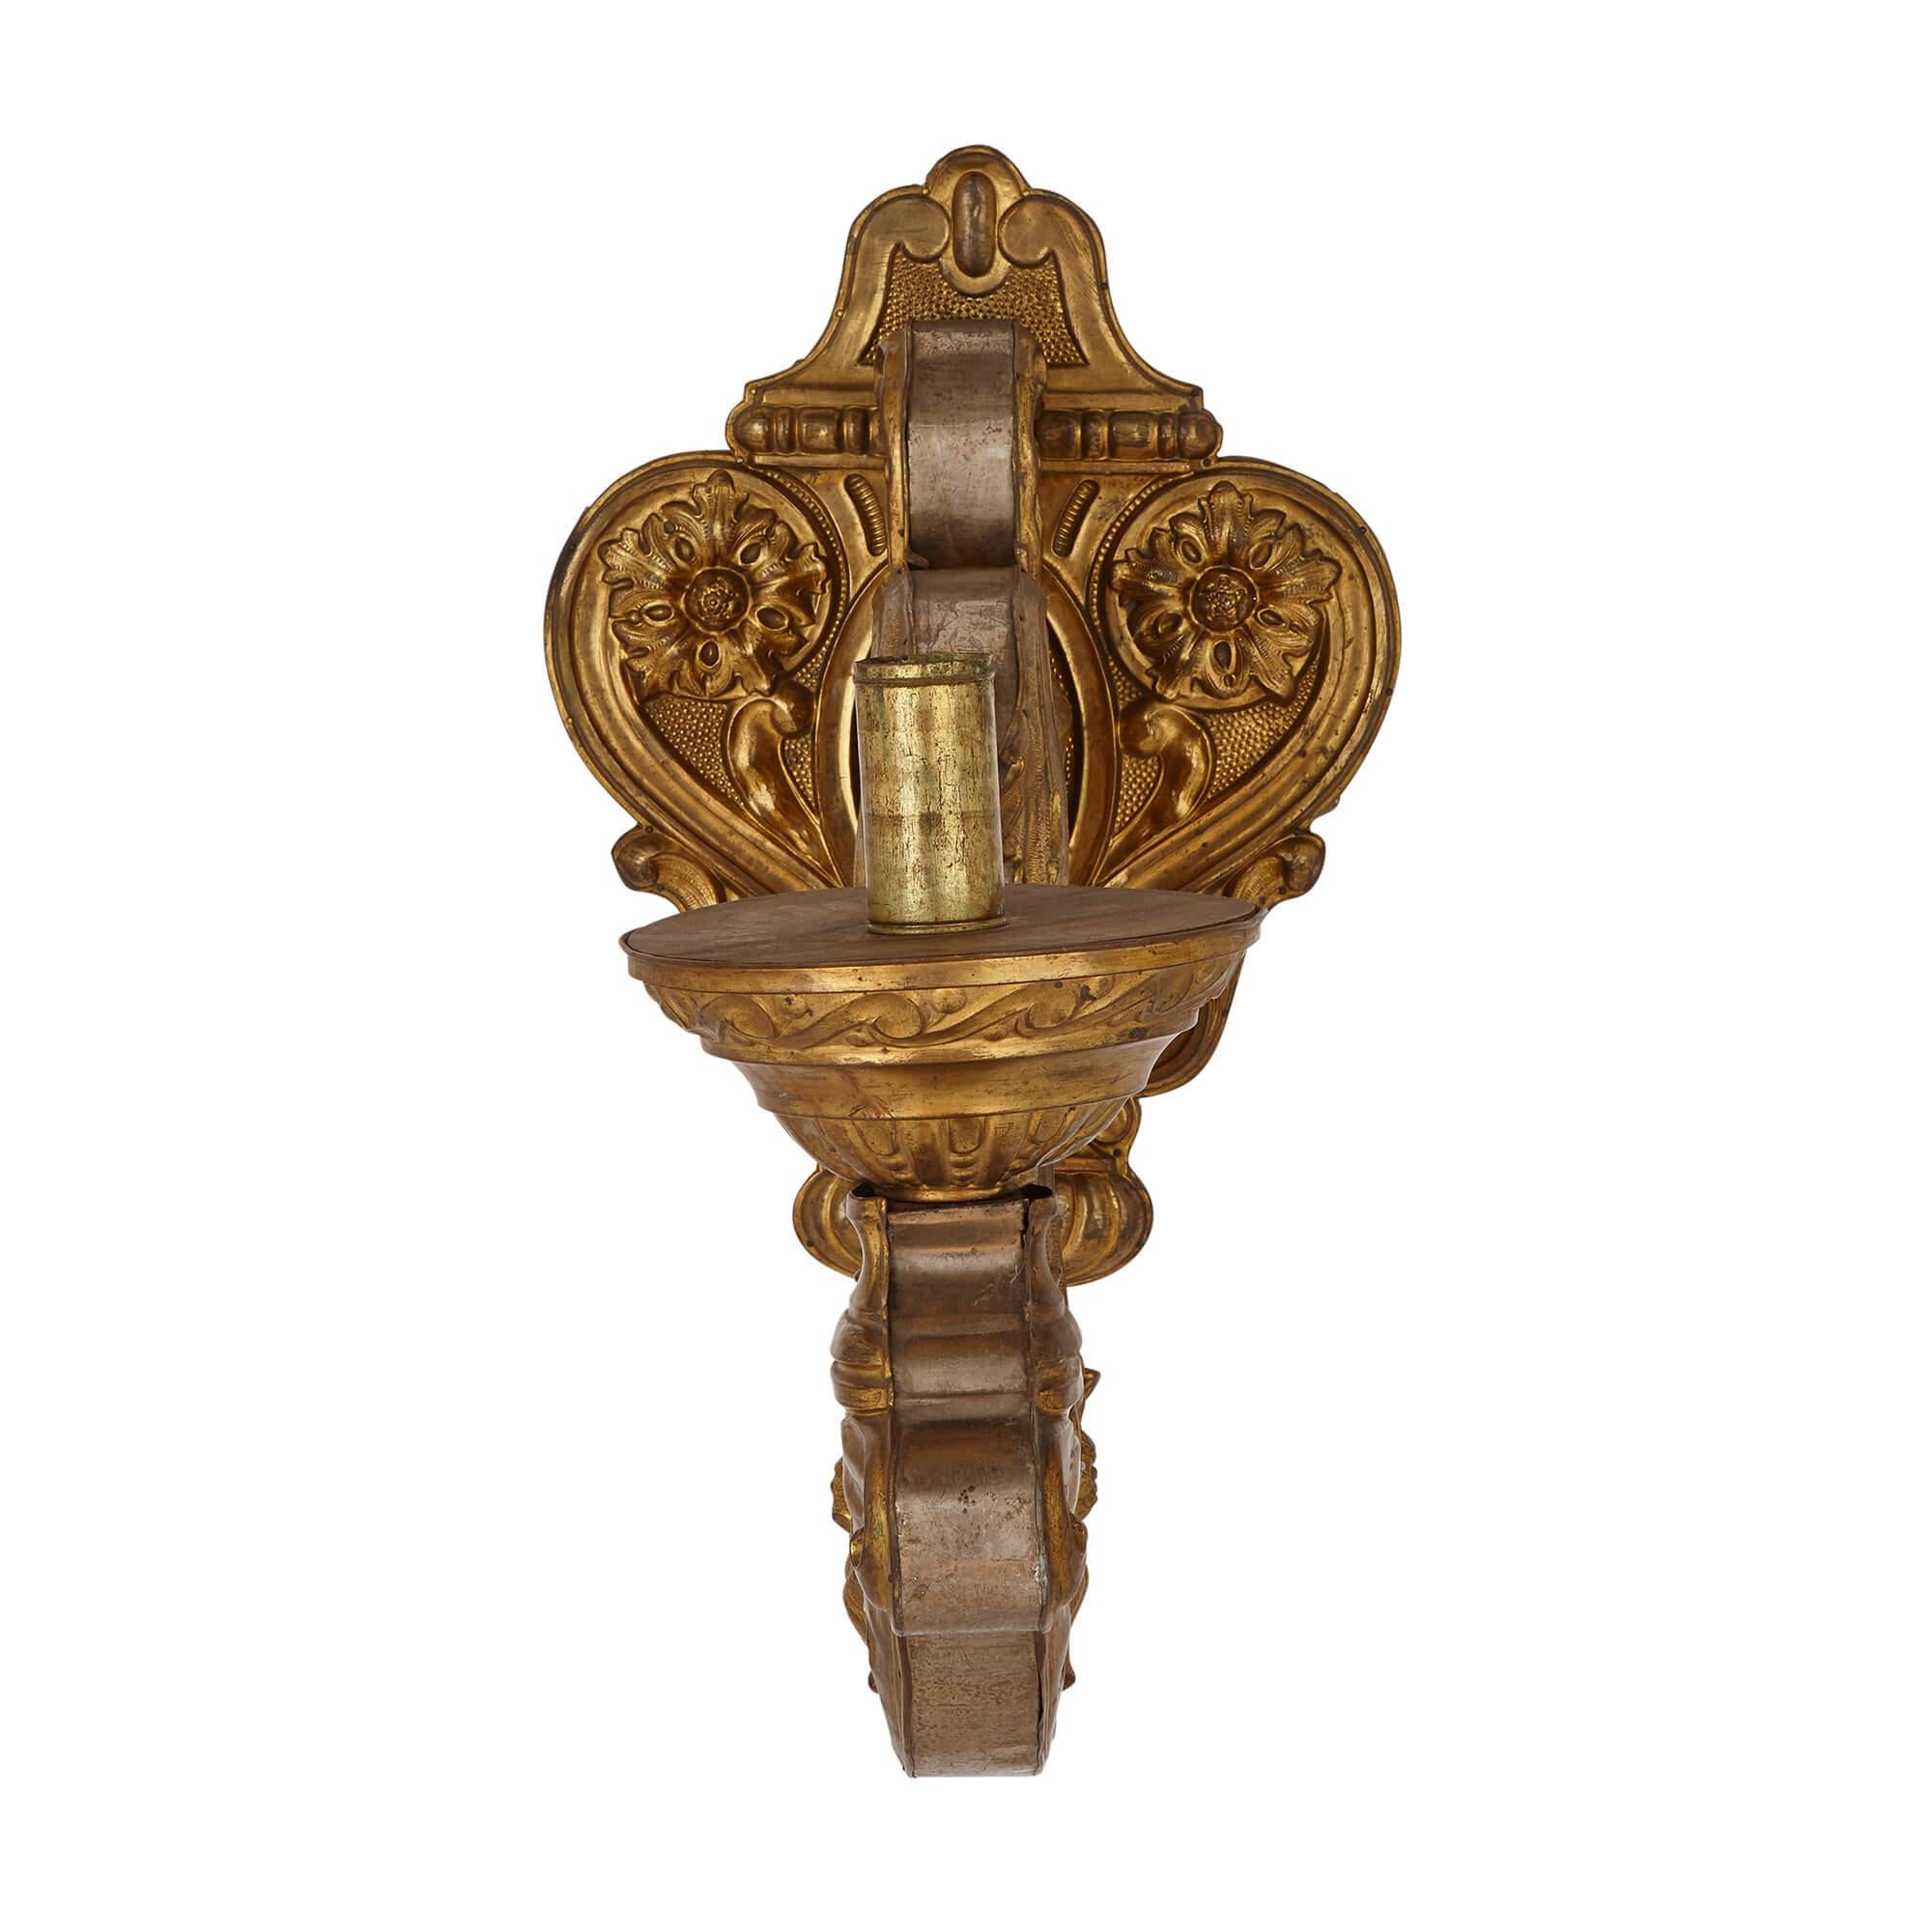 Pair of brass wall sconces in the Baroque style
Continental, early 20th Century
Height 67cm, width 42cm, depth 91cm

The sconces in this pair, which are crafted from moulded brass, are designed in the Baroque style. Each sconce features an